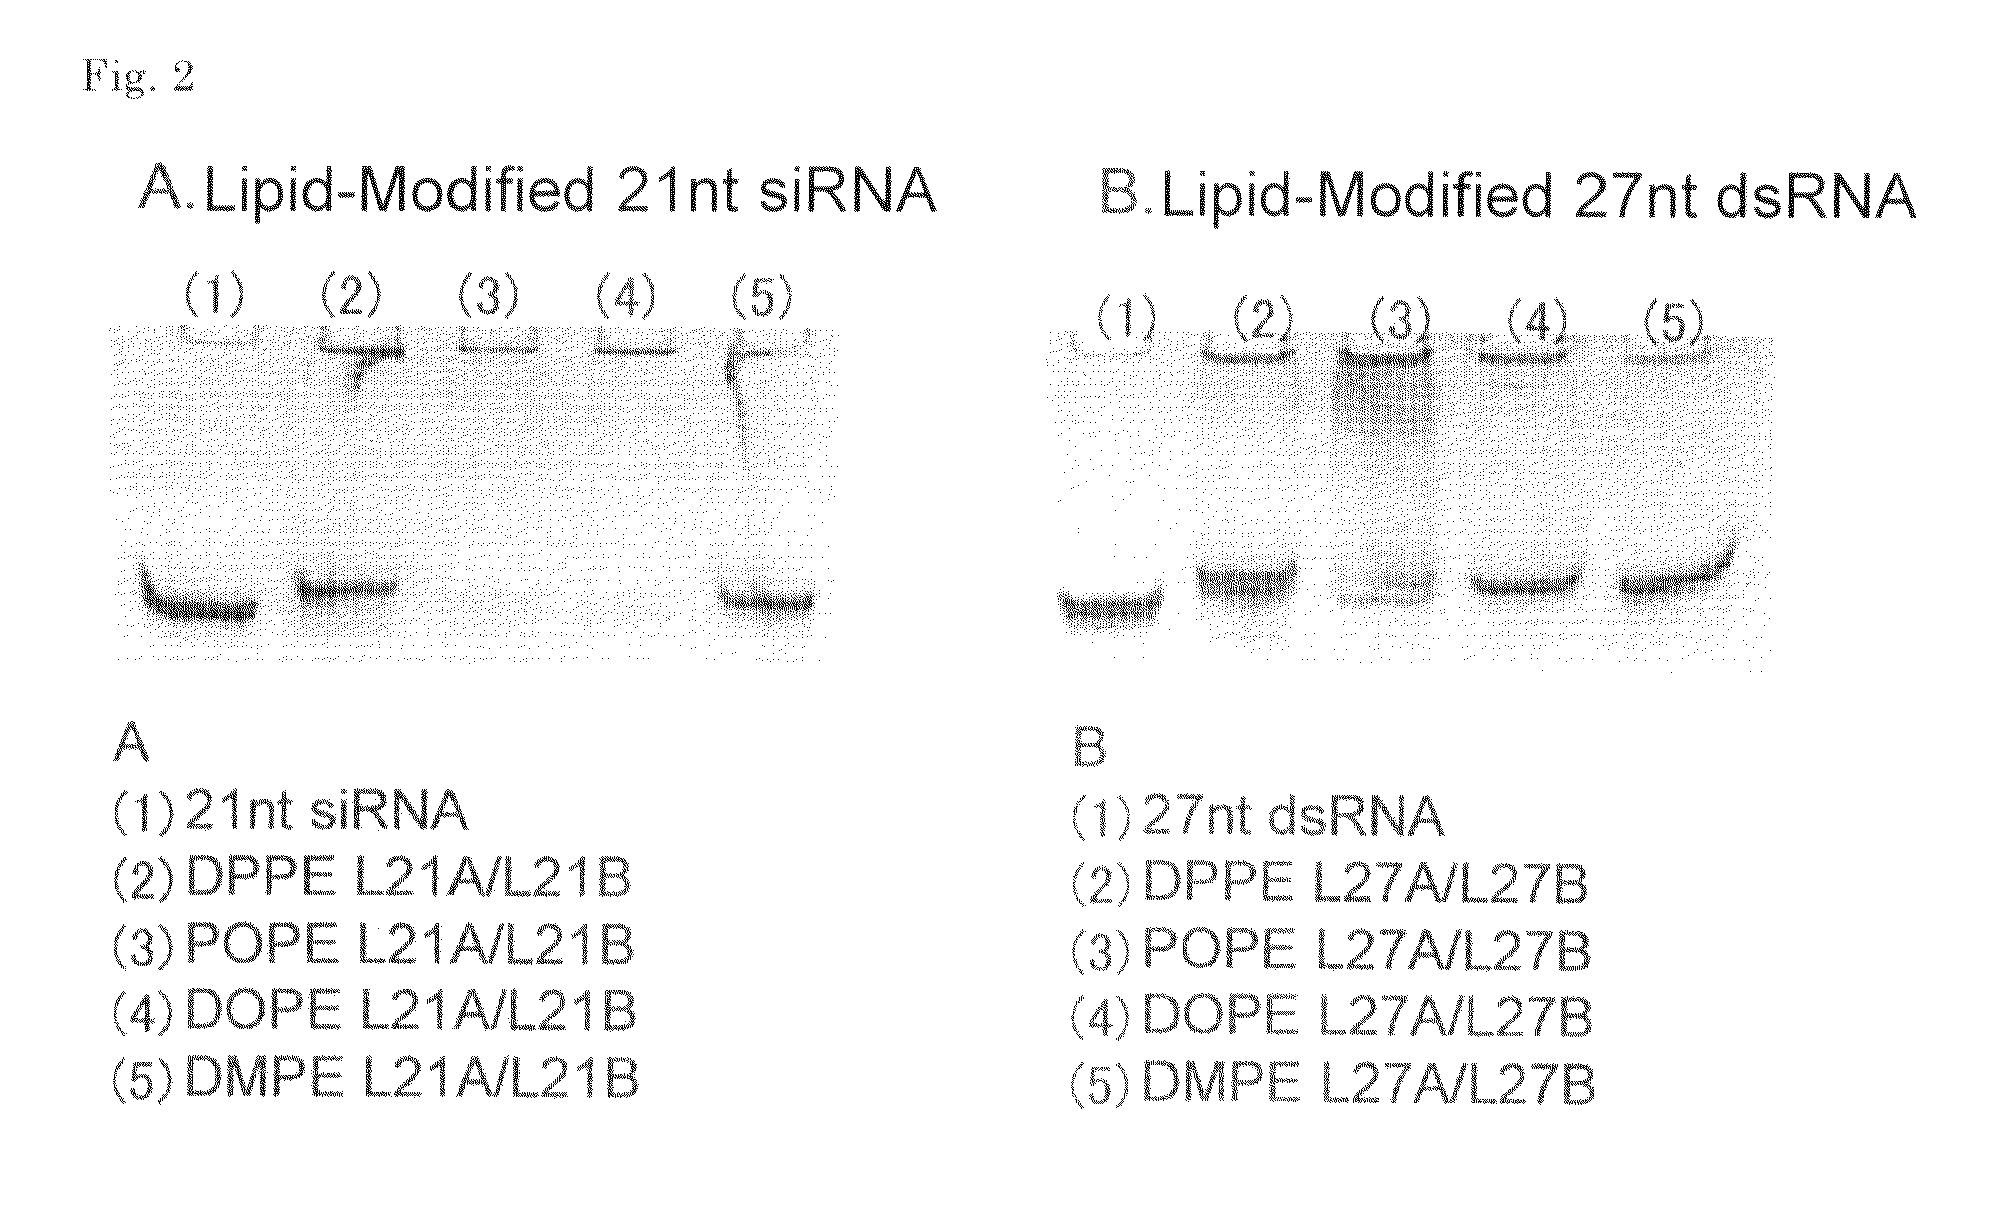 Double-stranded lipid-modified RNA having high RNA interference effect